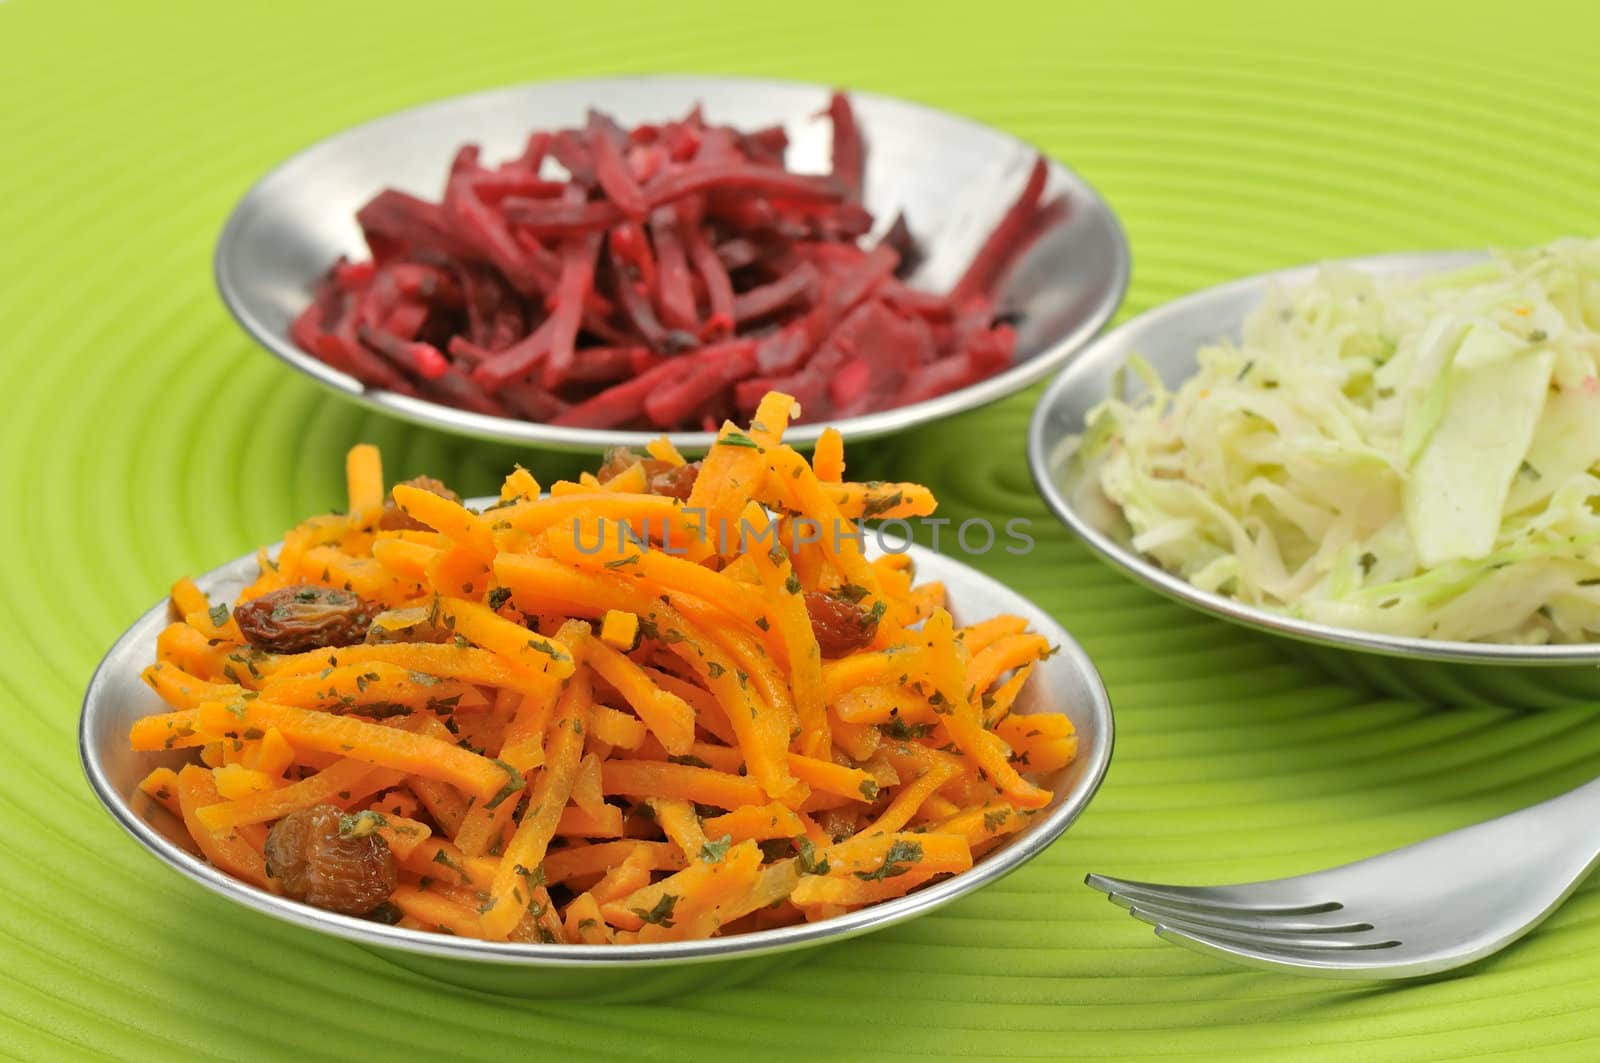 Grated carrots beetroot and white cabbage salad - focus on carrots